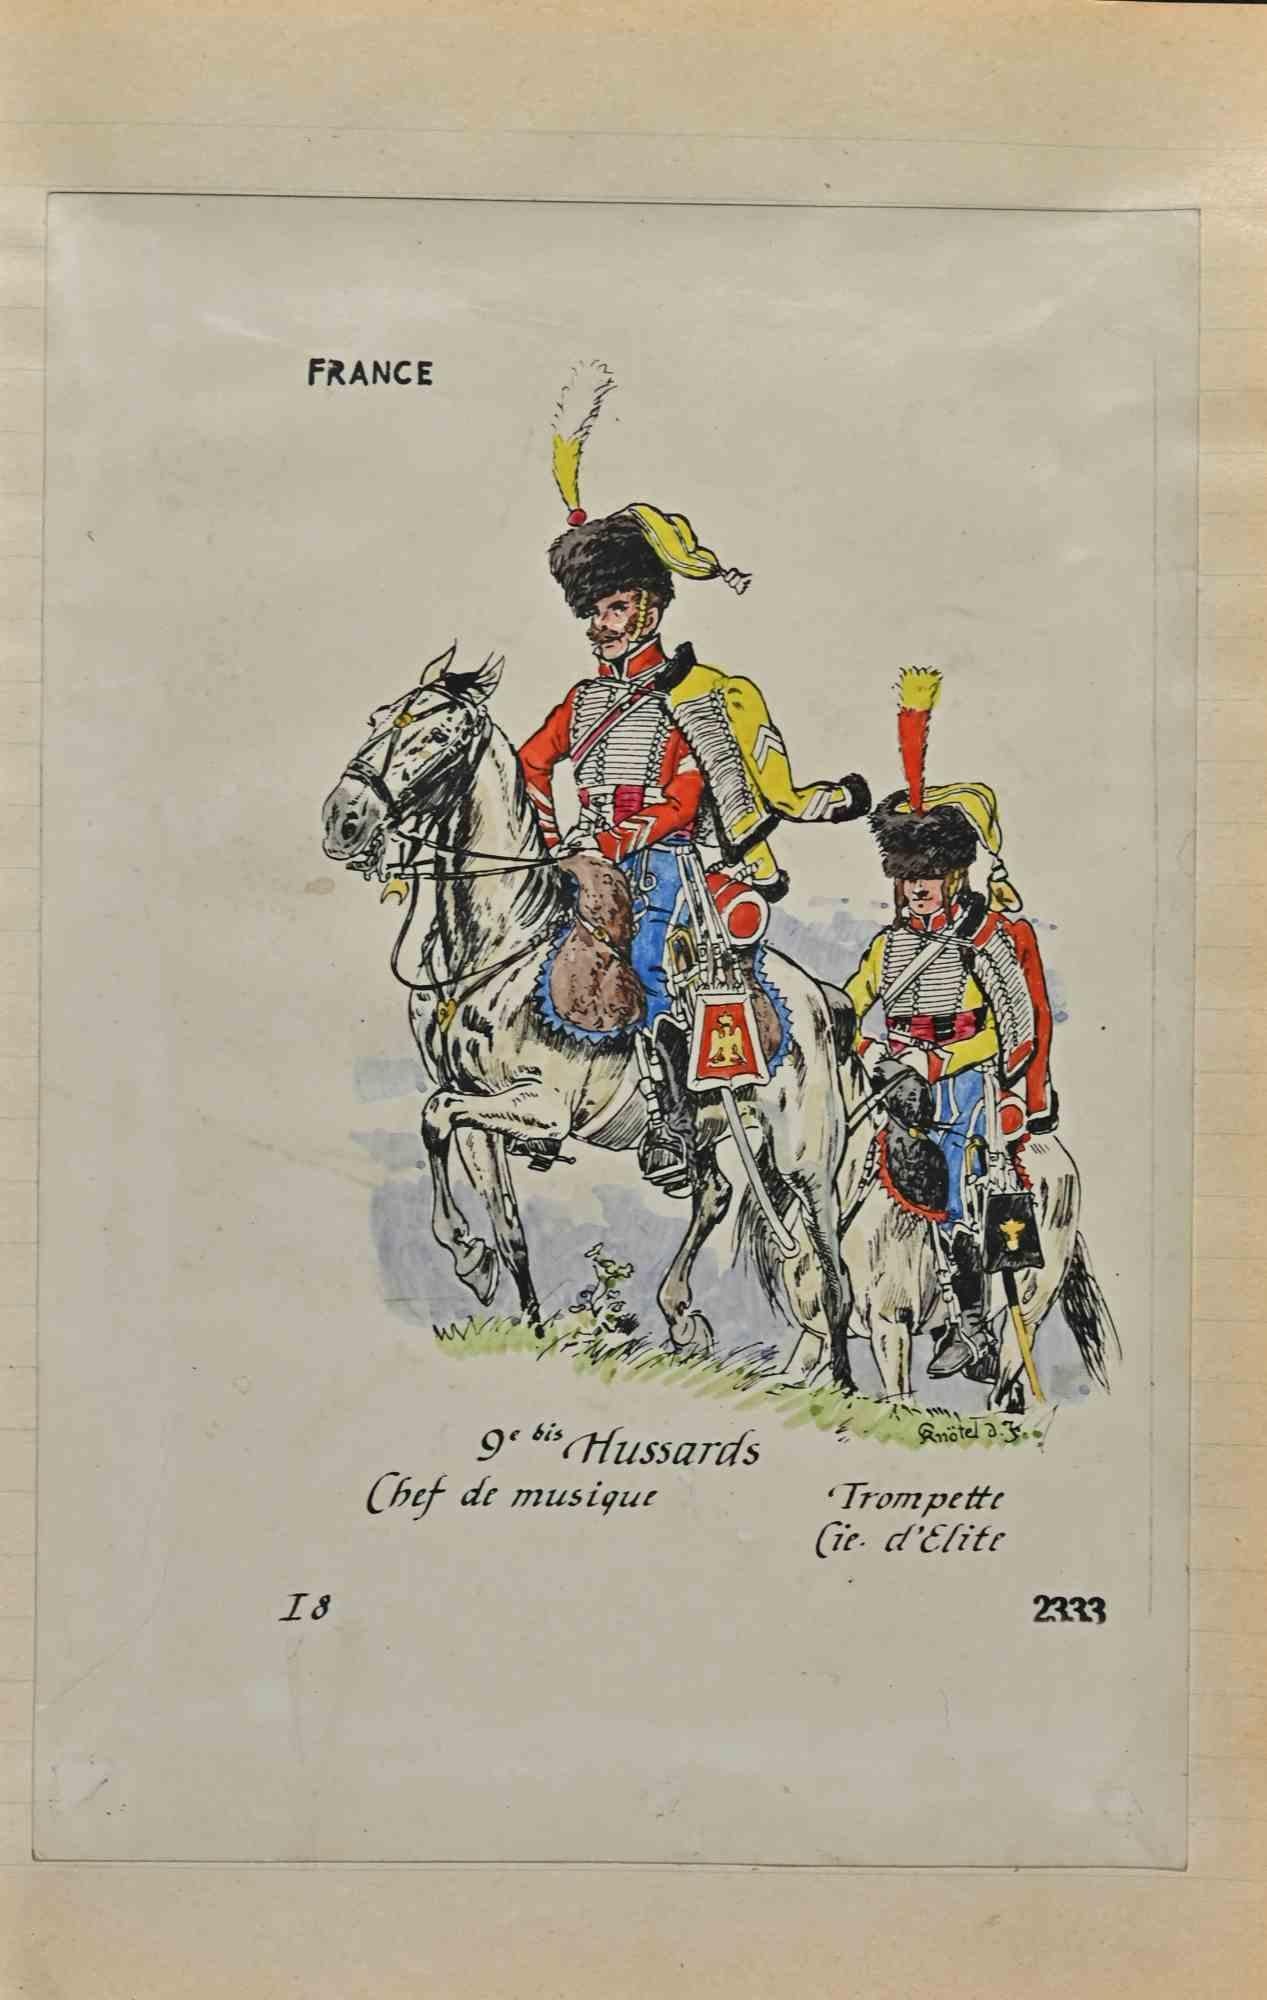 9e bis Hussards is an original drawing in ink and watercolor realized by Herbert Knotel in 1930/40s.

Good condition except for being aged.

Hand-signed.

The artwork is depicted through strong lines in well-balanced conditions.

Herbert Knotel was